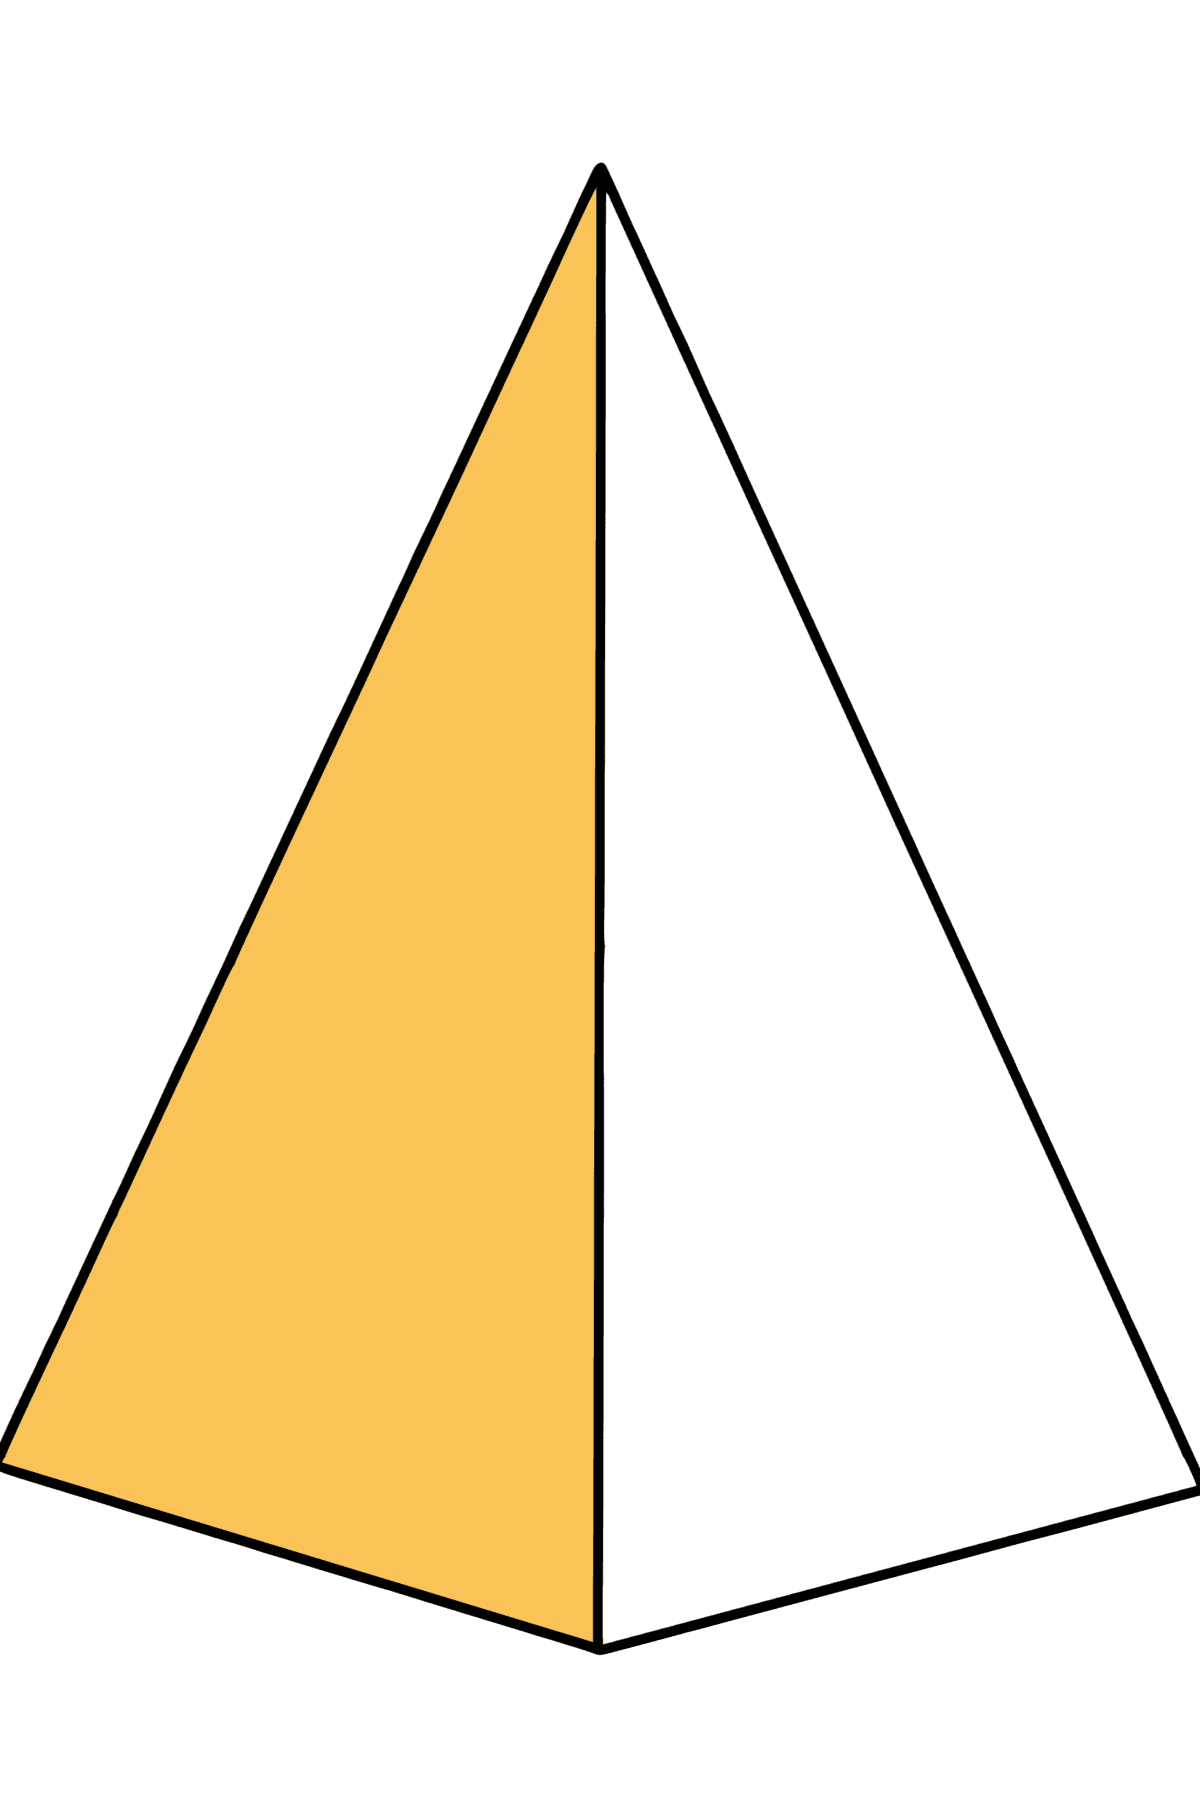 Pyramid coloring page - Coloring Pages for Kids